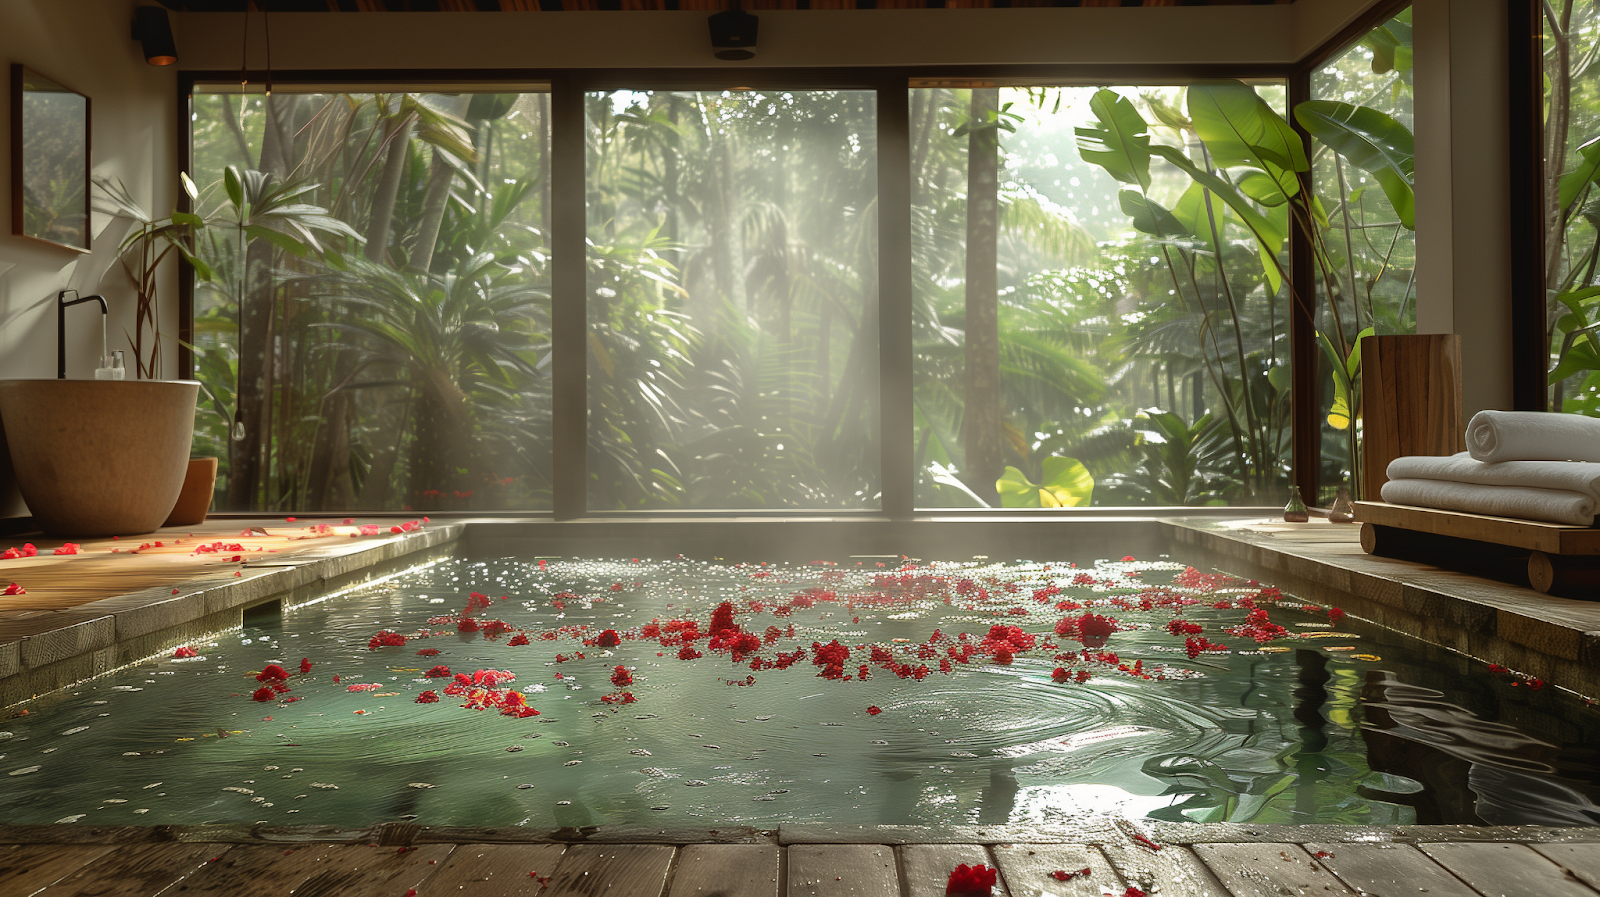 A spa pool with petals of flowers on the surface